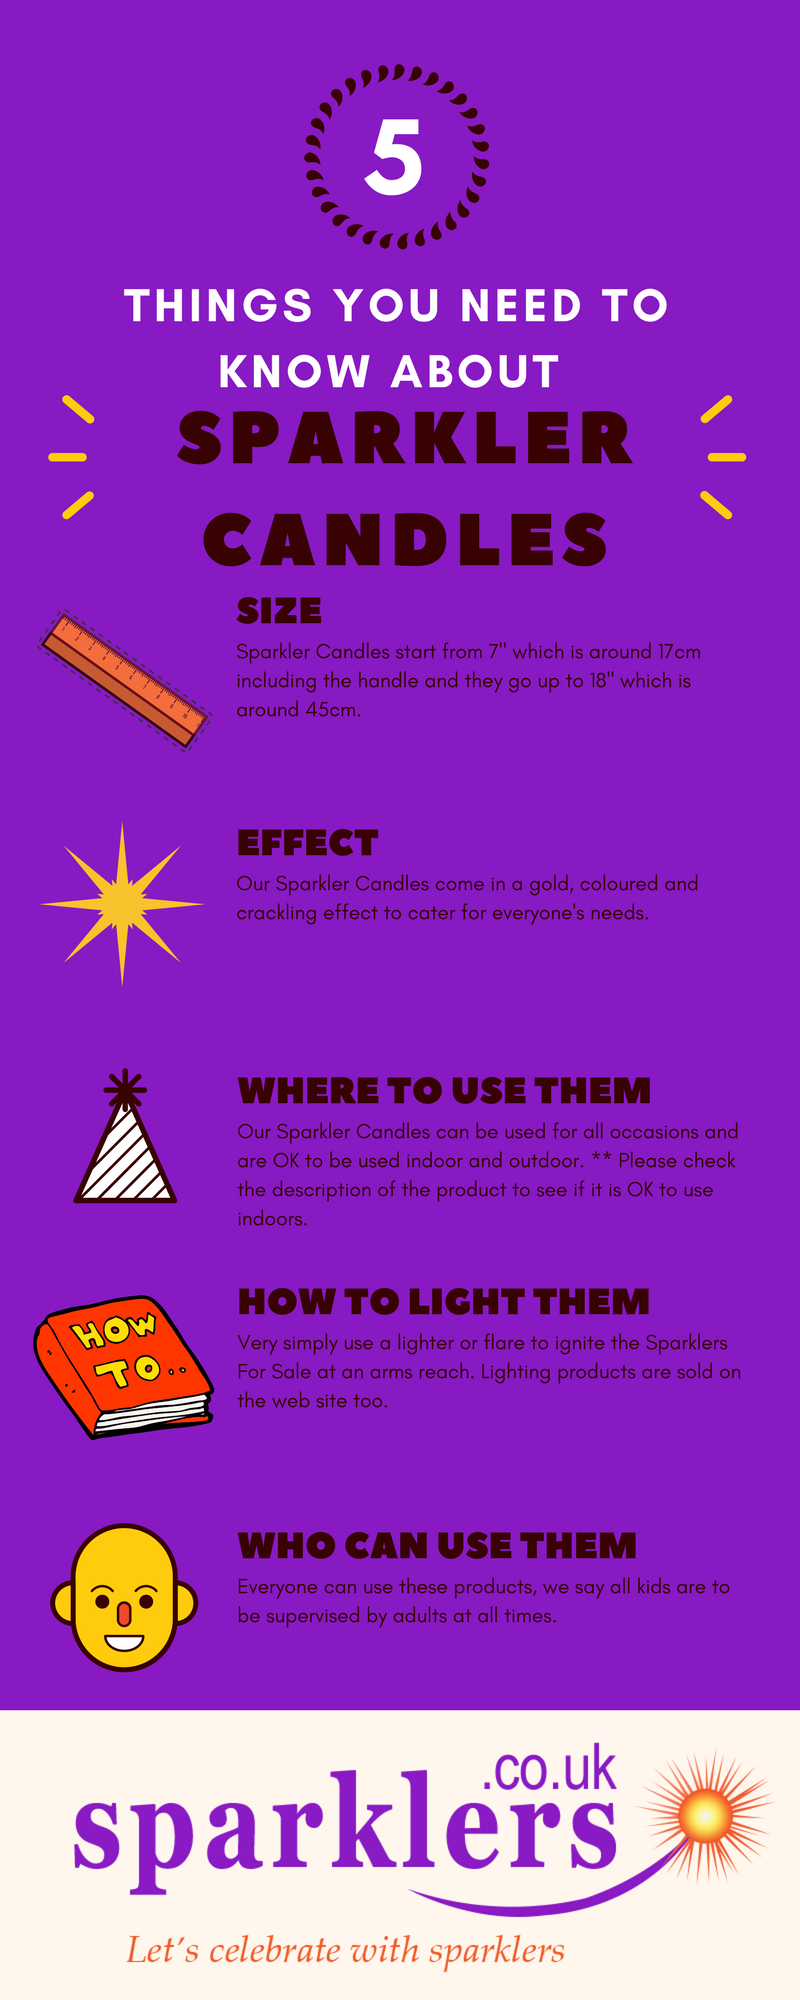 Sparkler-Candles-info-graphic